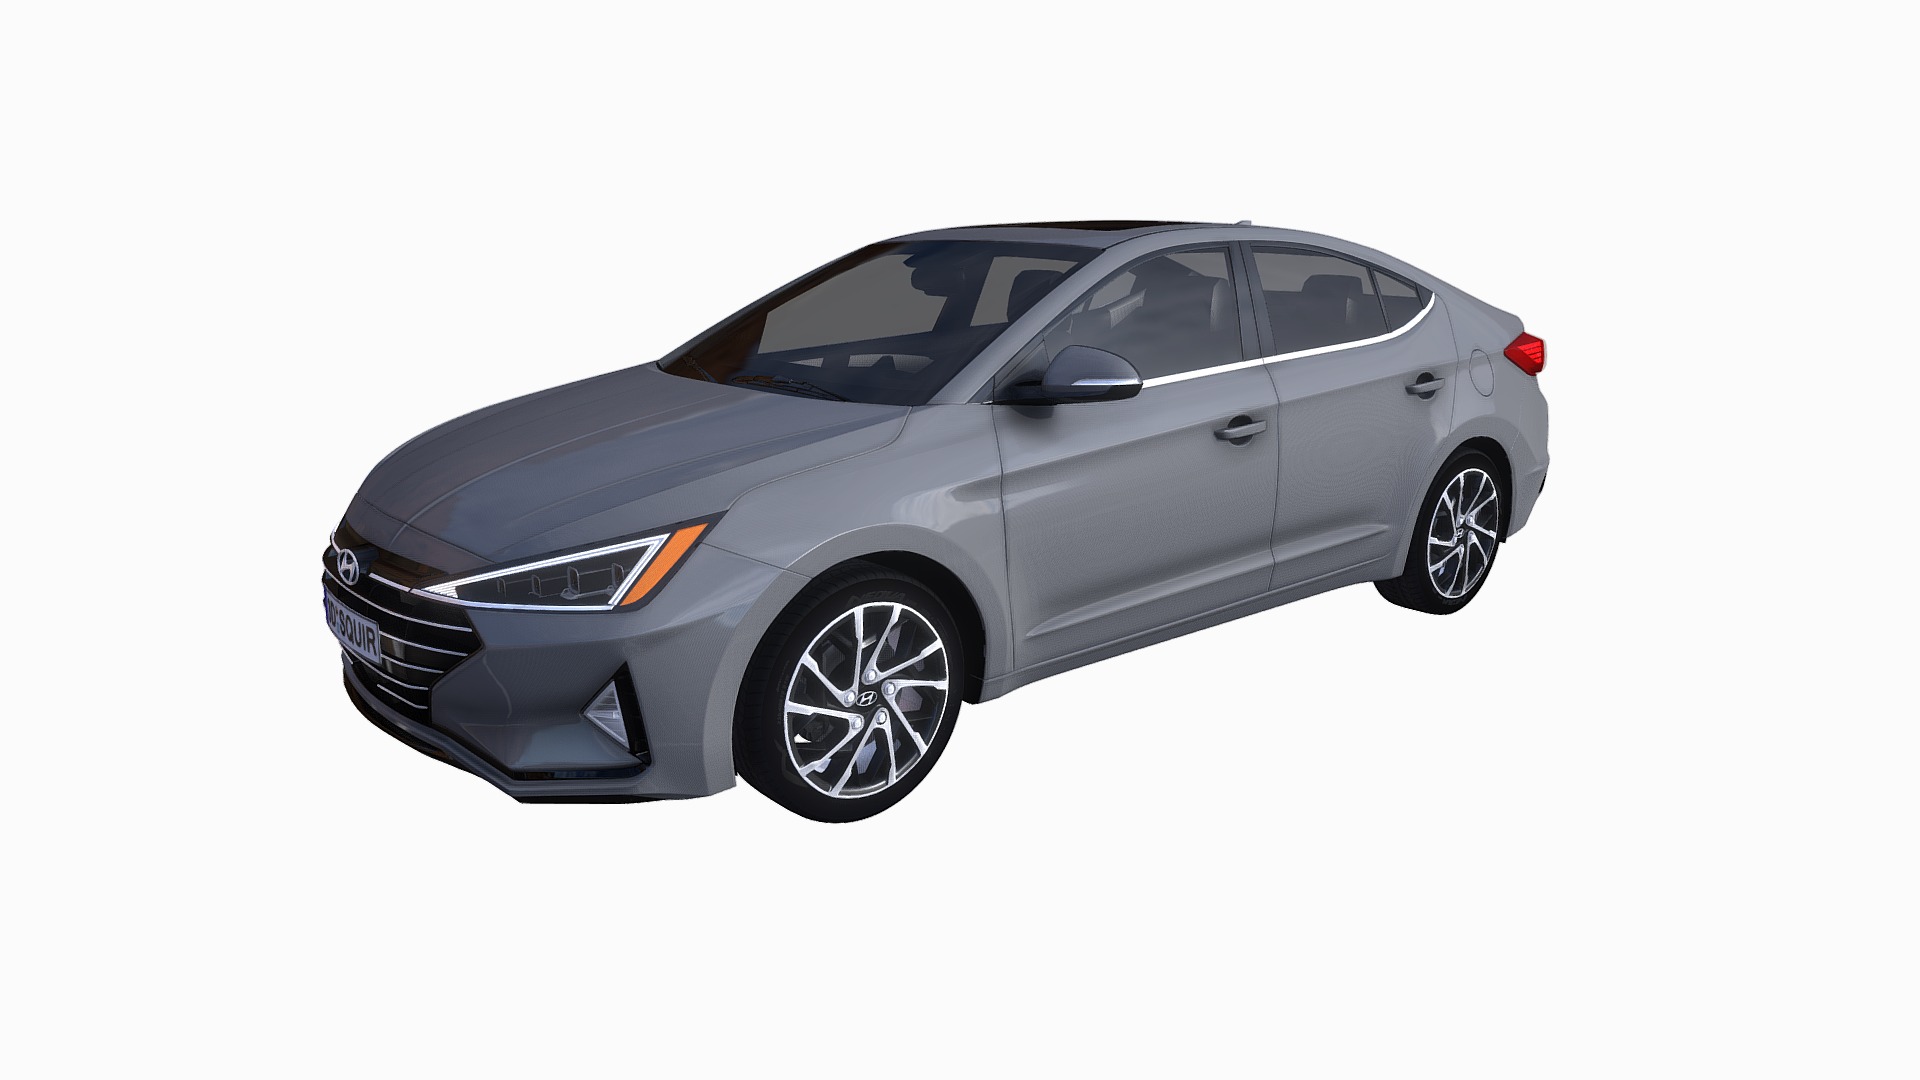 3D model Hyundai Elantra 2019 - This is a 3D model of the Hyundai Elantra 2019. The 3D model is about a silver car with a black top.